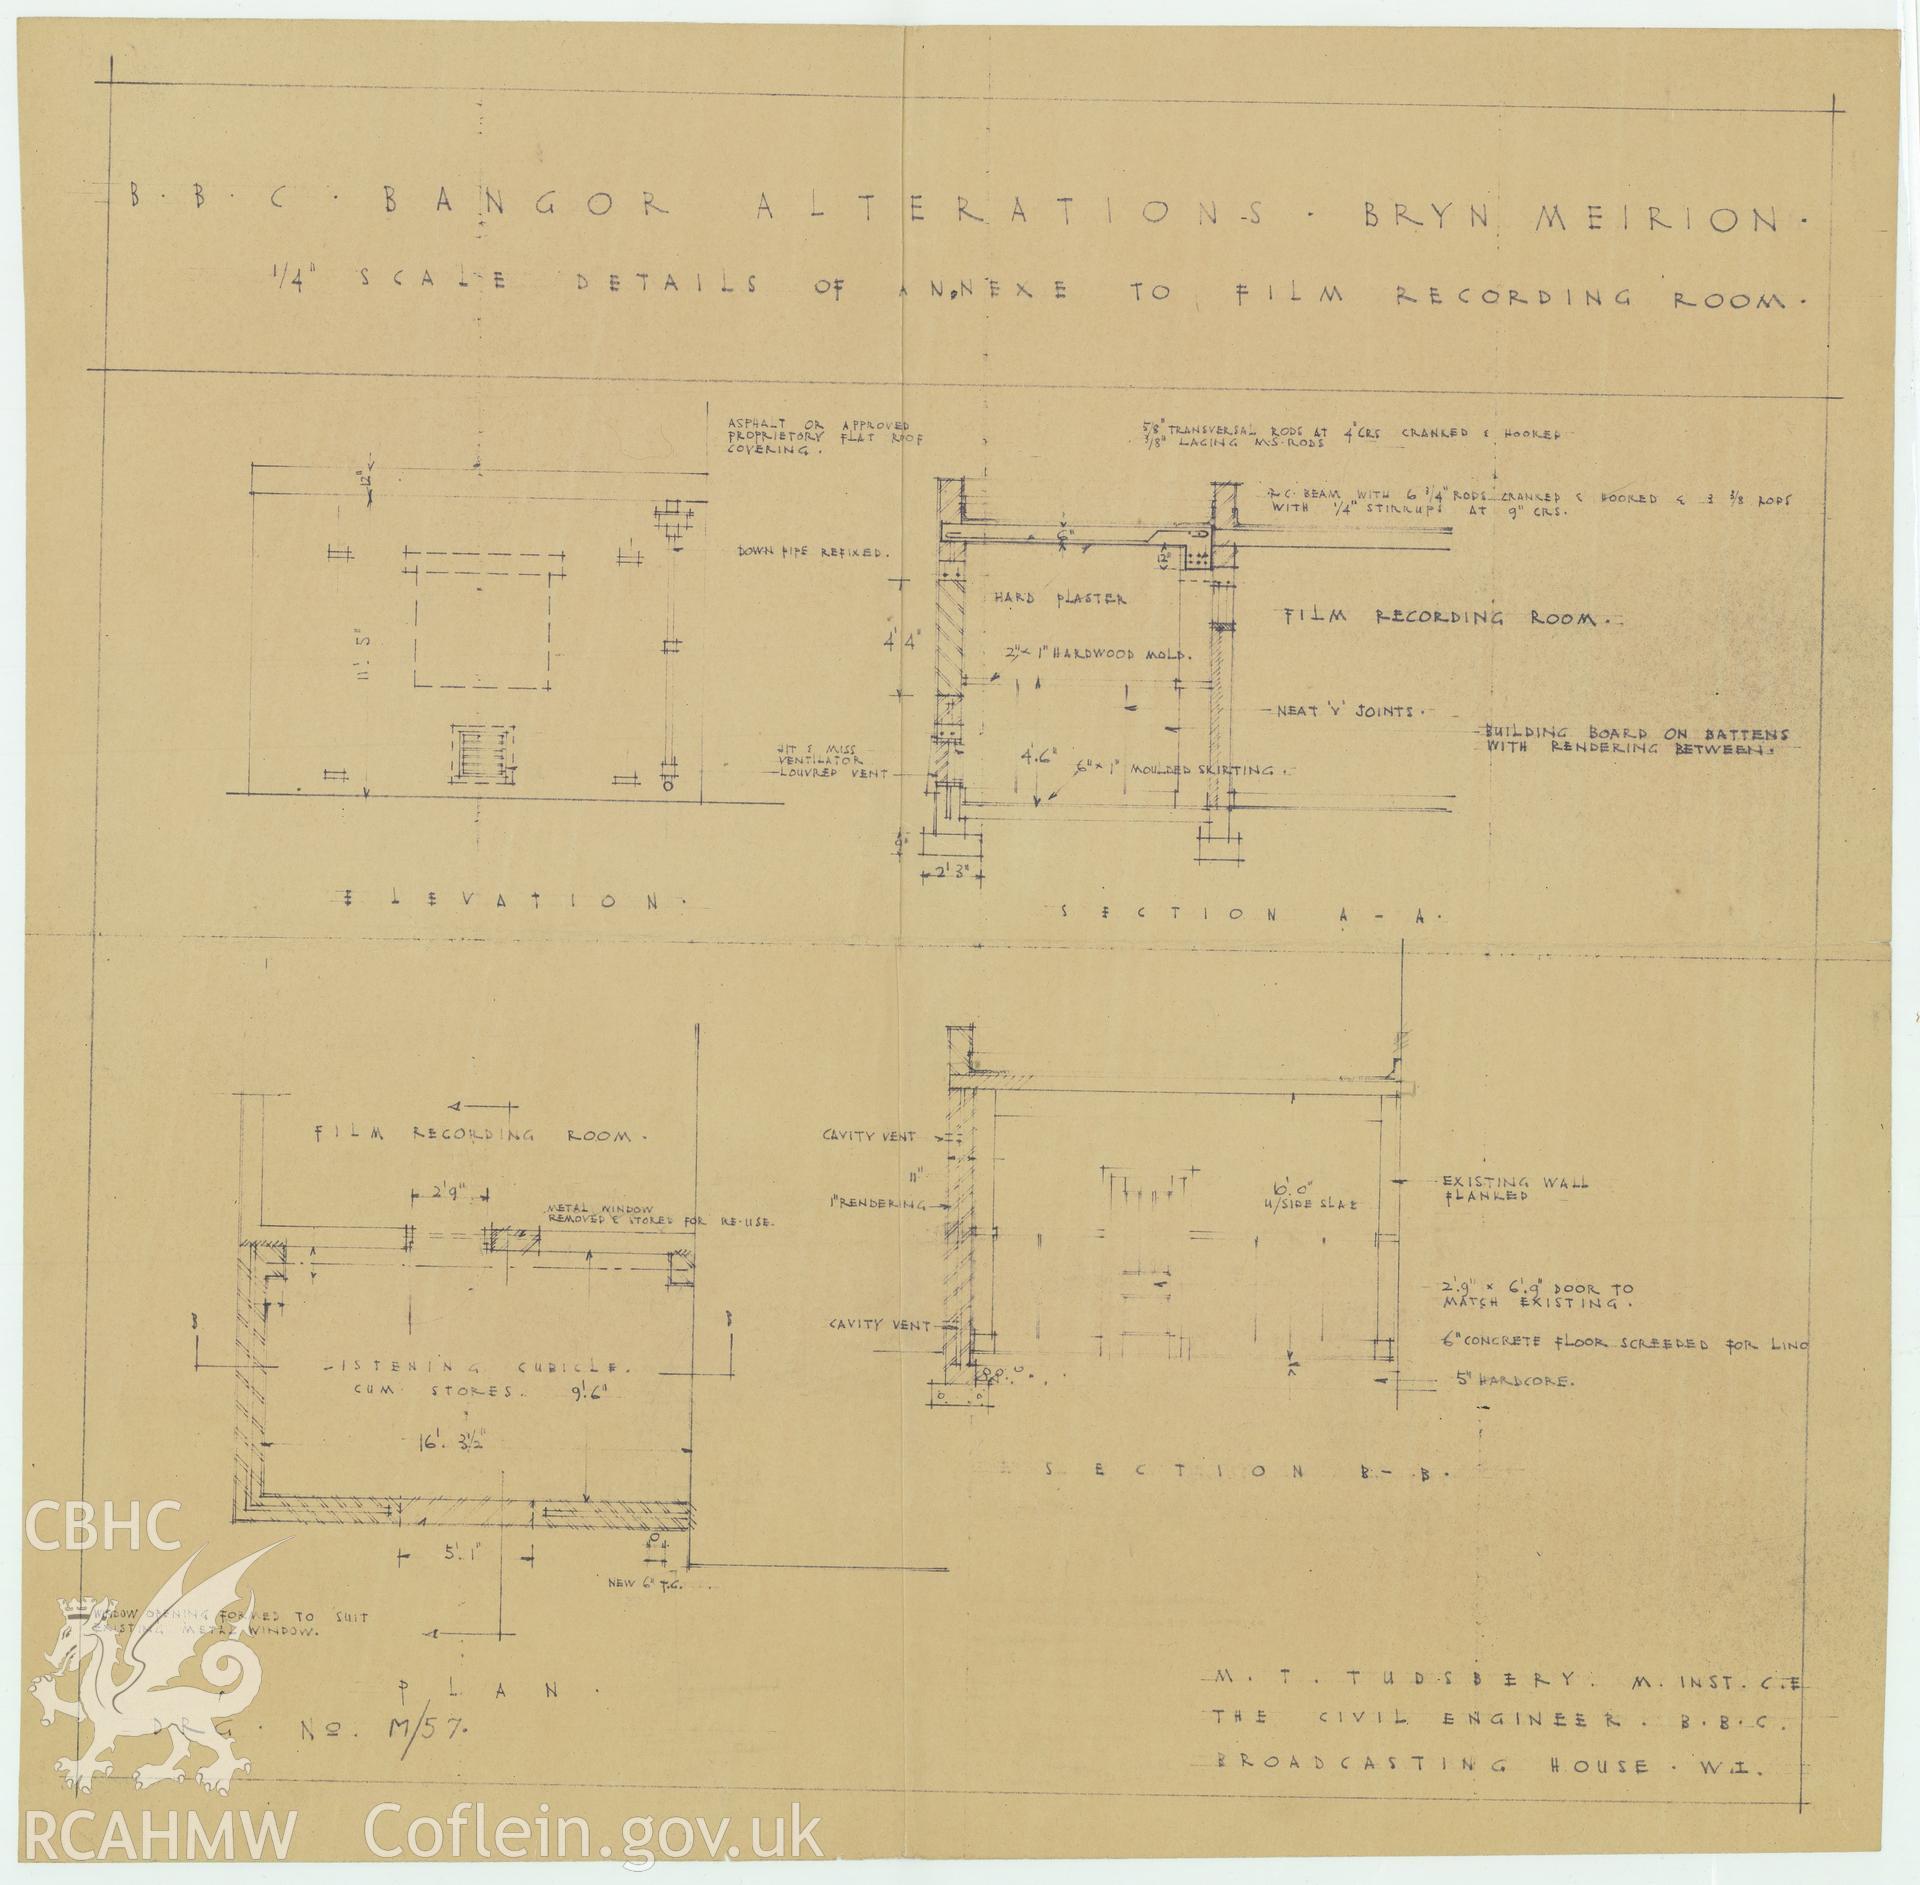 BBC premises, Broadcasting House, Bangor - elevation and plan drawing of the annex to the film recording room at Bryn Meirion. Drawing No. M/57, undated.